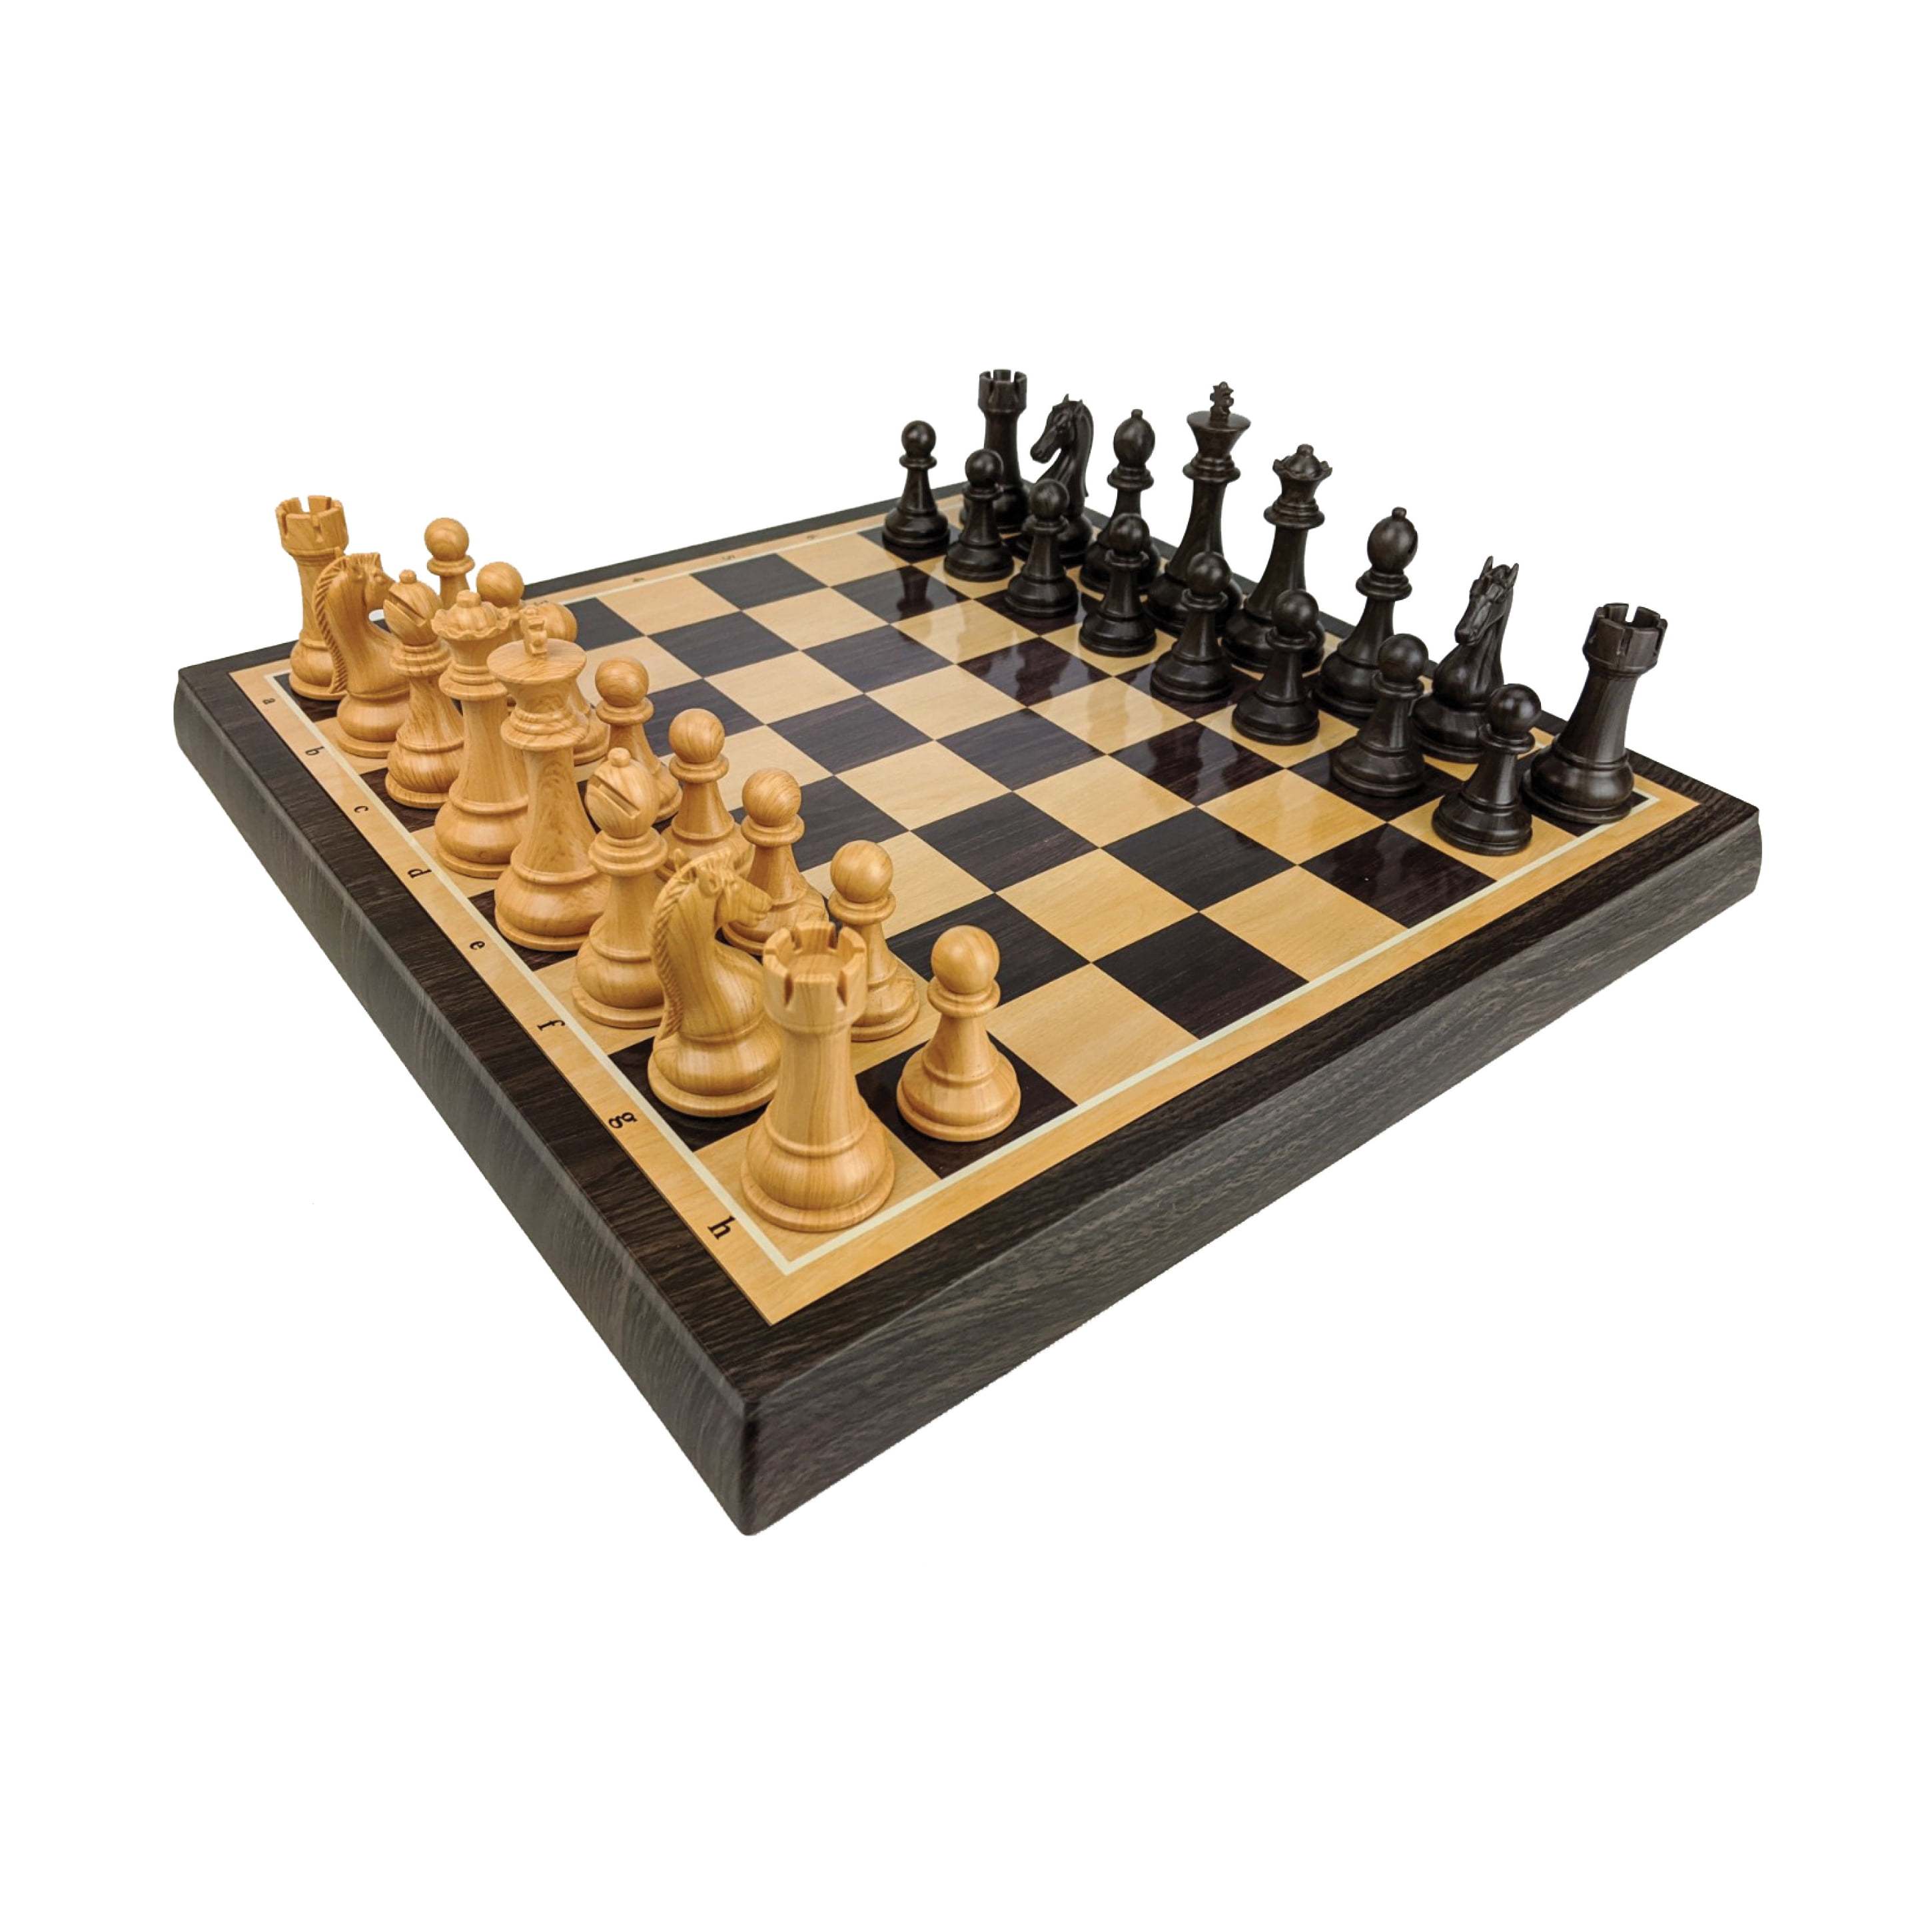 Buy The Chaturanga, or Game of Chess Book Online at Low Prices in India